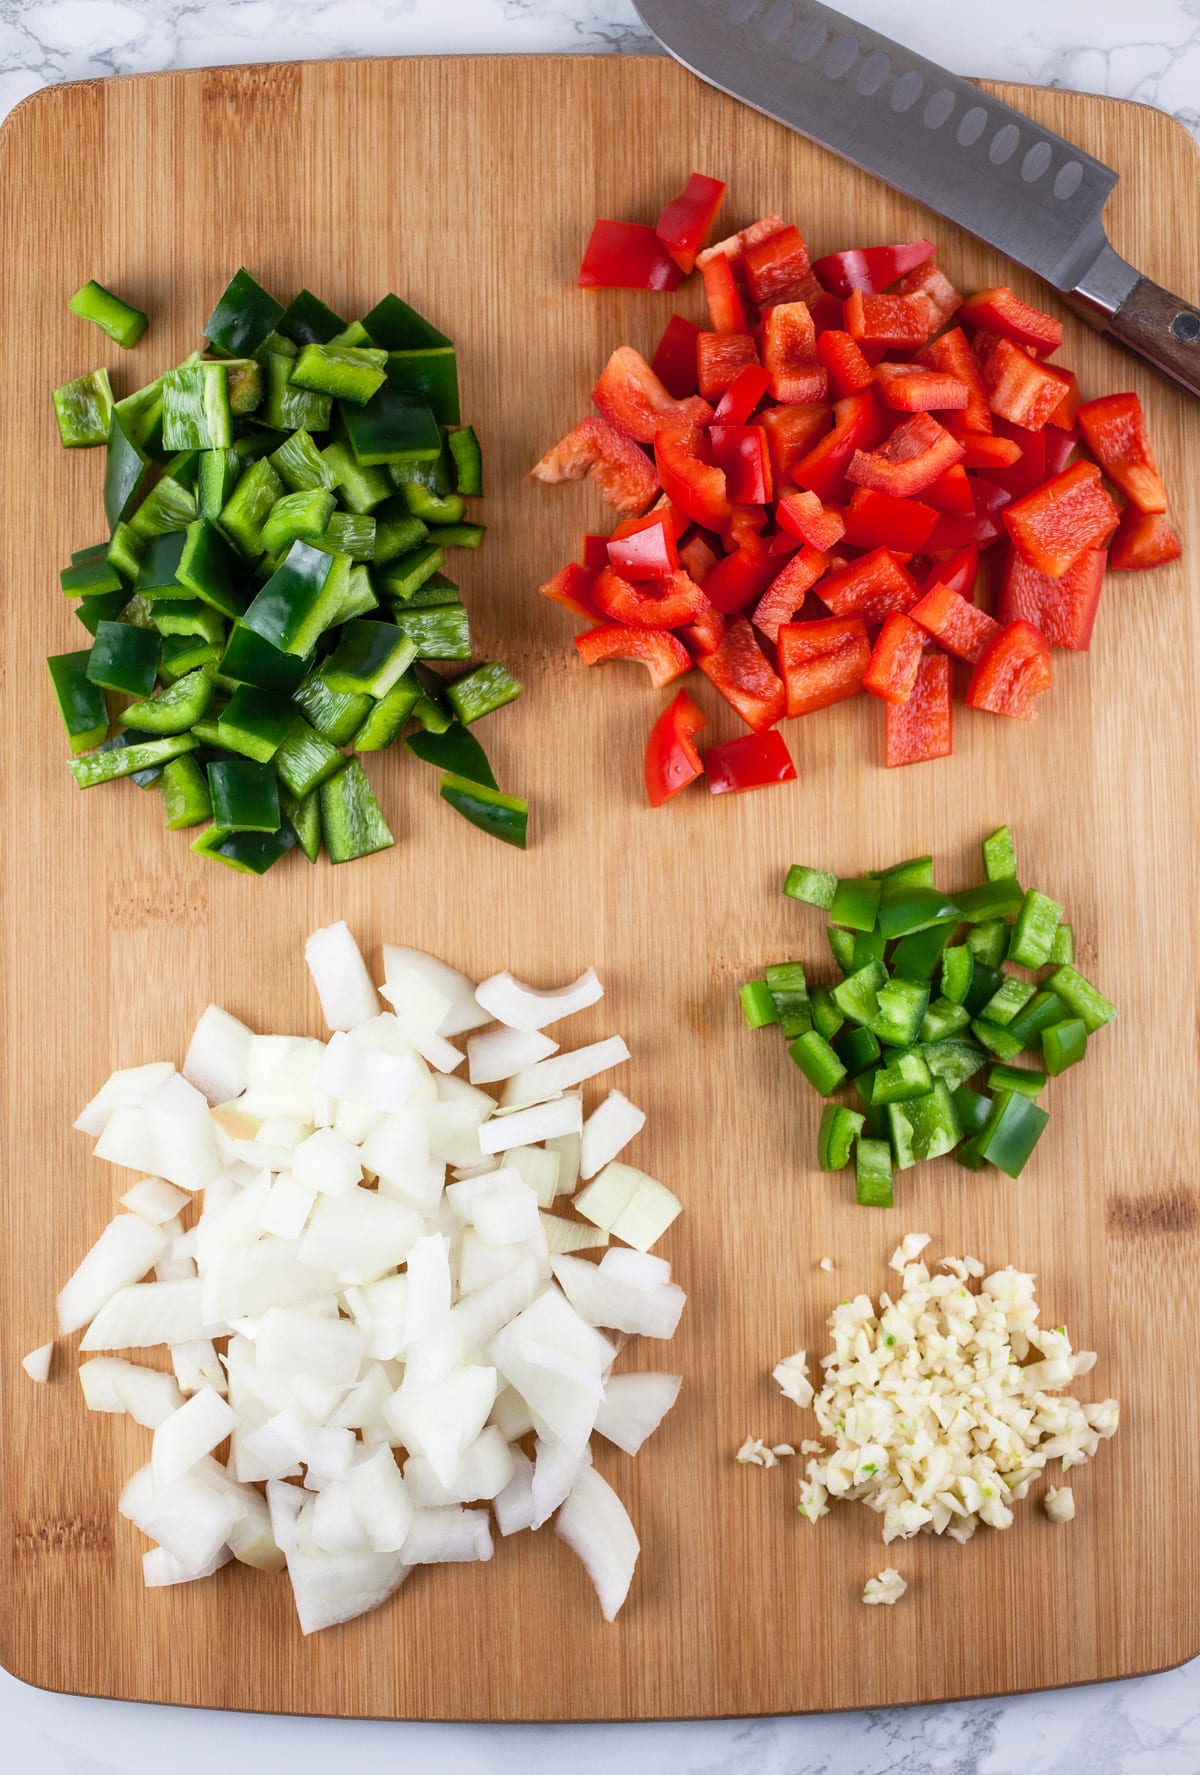 Minced garlic, onions, jalapeno, red bell pepper, and poblano pepper on wooden cutting board with knife.